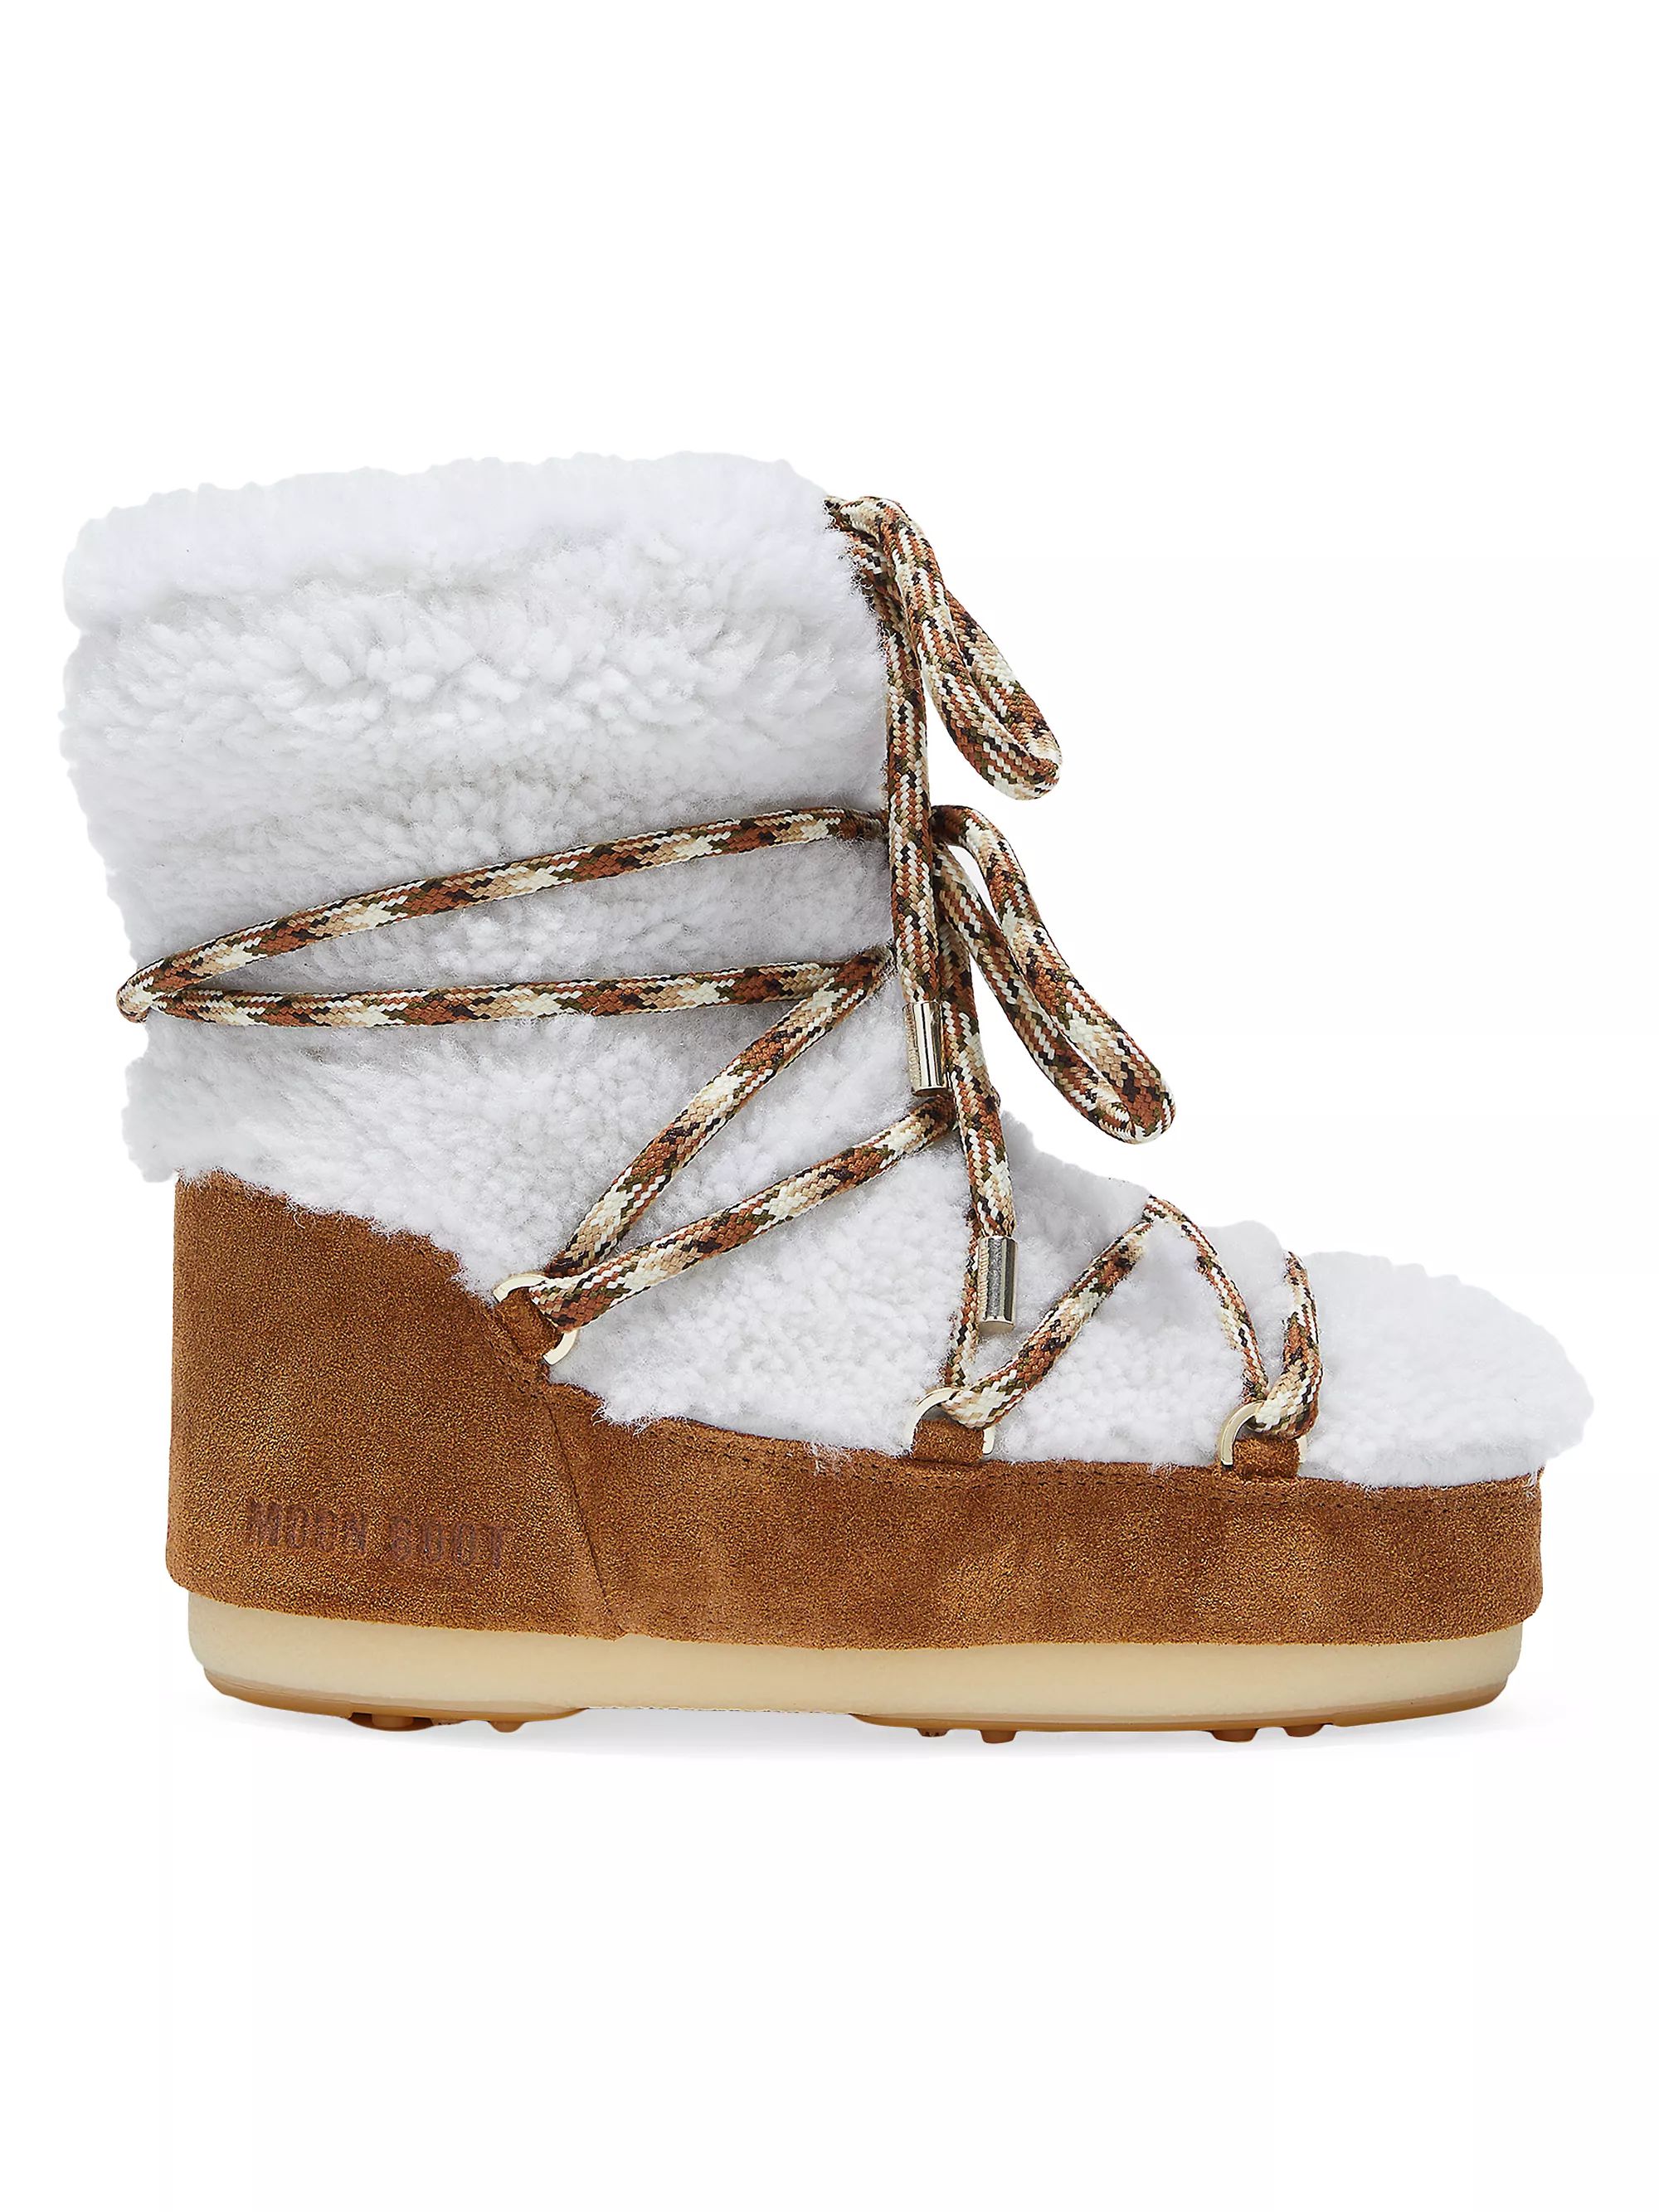 Unisex Light Low Shearling Snow Boots | Saks Fifth Avenue